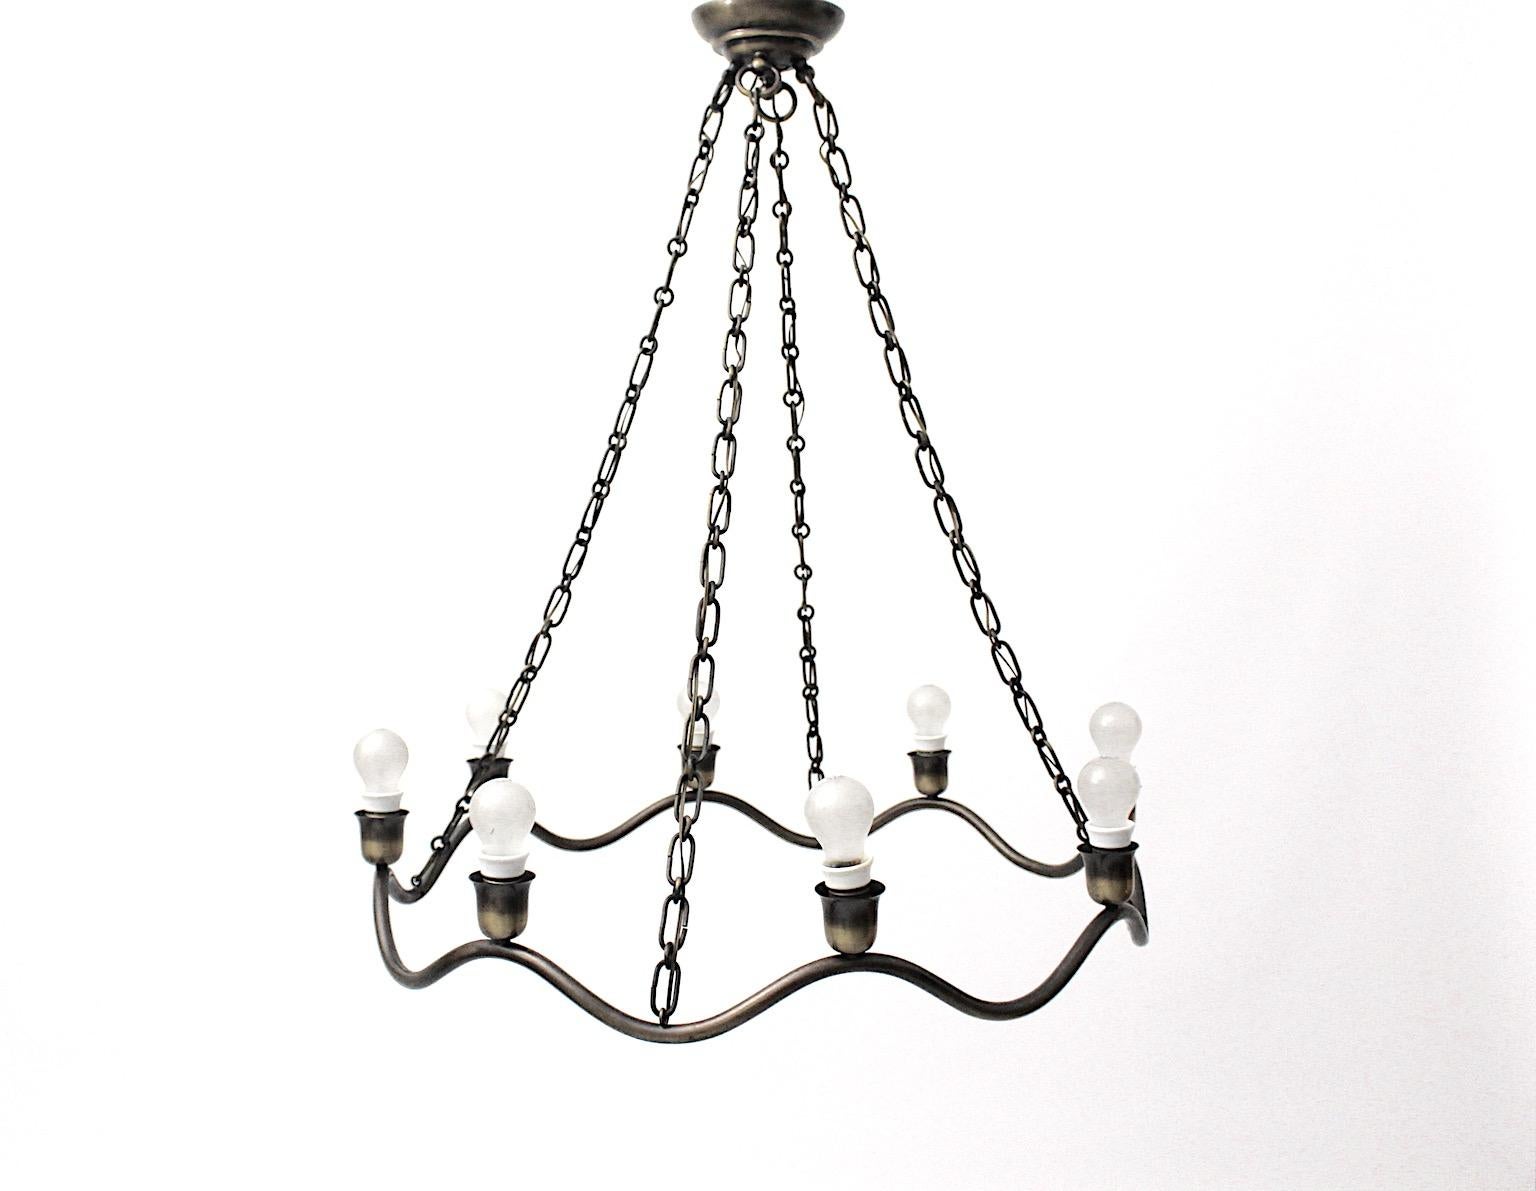 Art Deco vintage brass chandelier in circular shape attributed to Hugo Gorge, circa 1930 Vienna.
A beautiful vintage wavy line chandelier from brass partly blackened impresses through its timeless and plain design.
This sophisticated chandelier